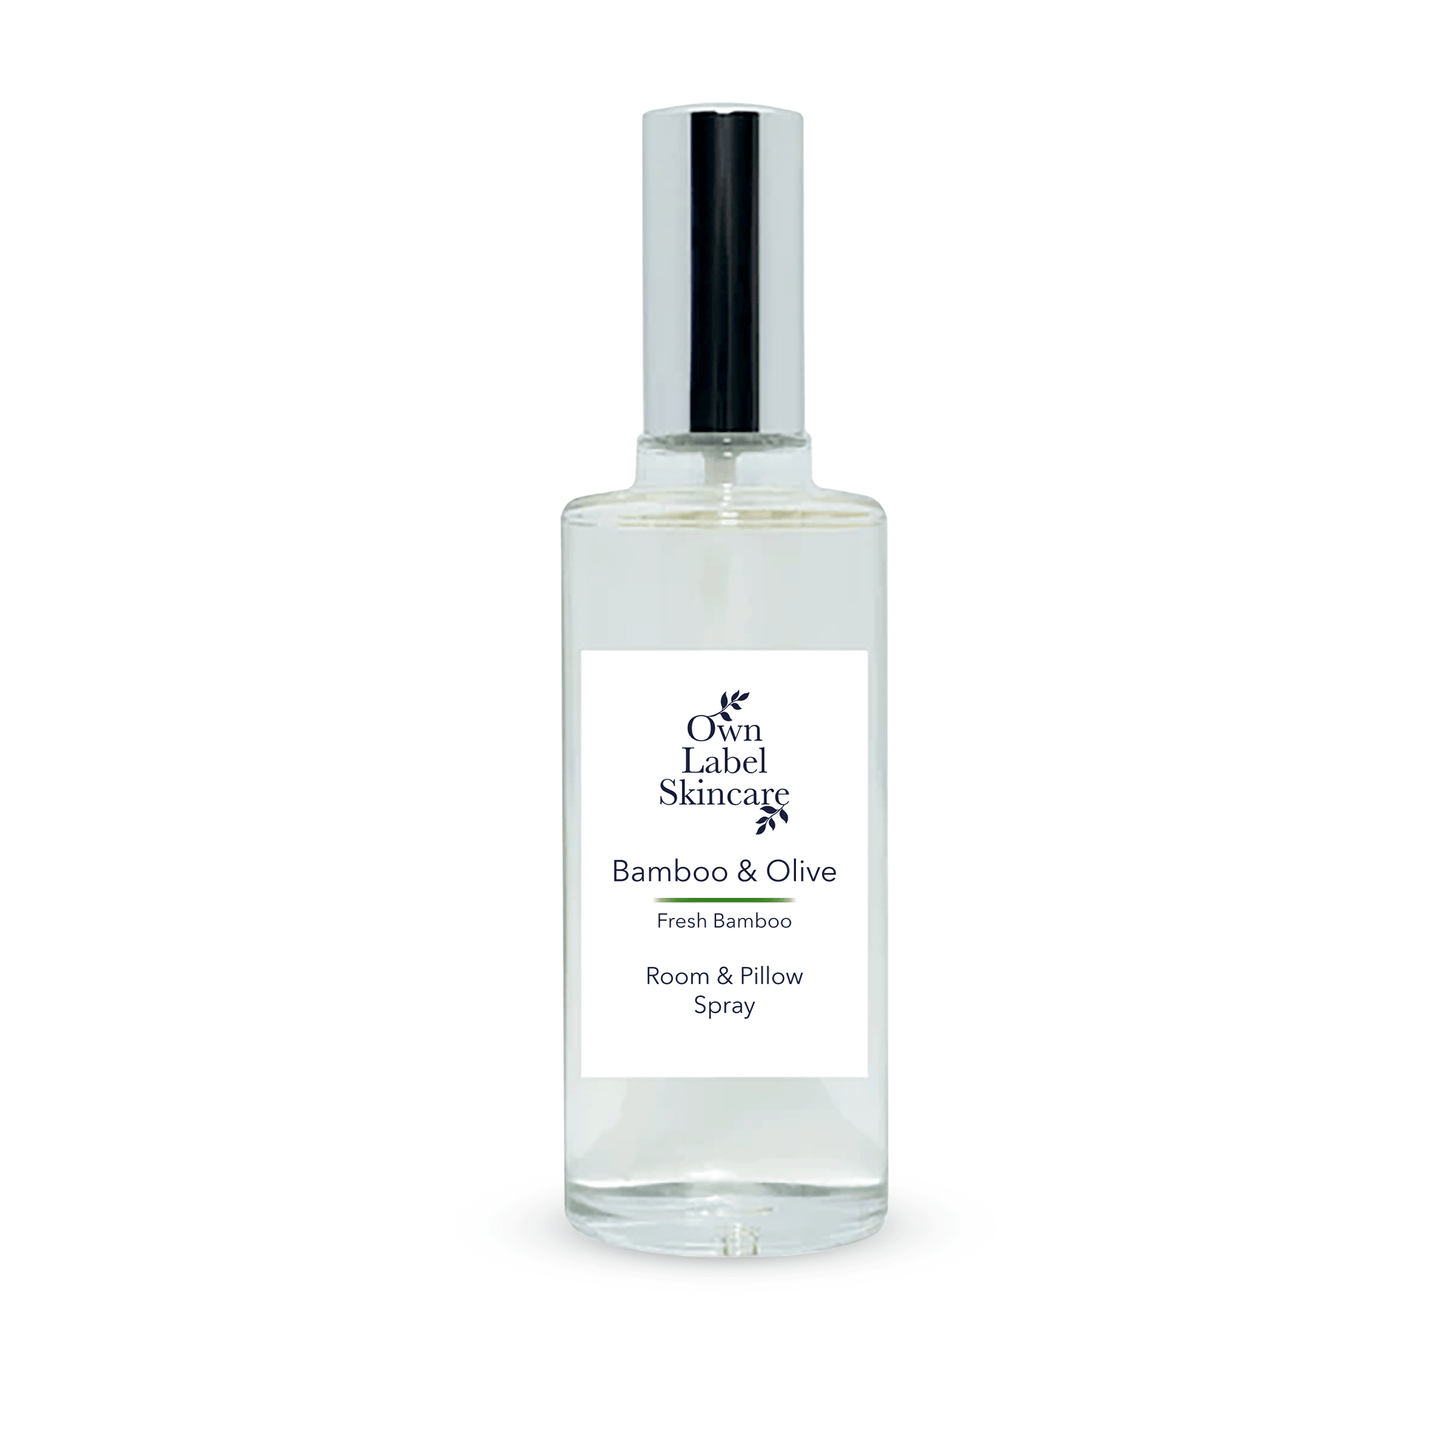 Bamboo and Olive Room Spray. Own Label Skincare.